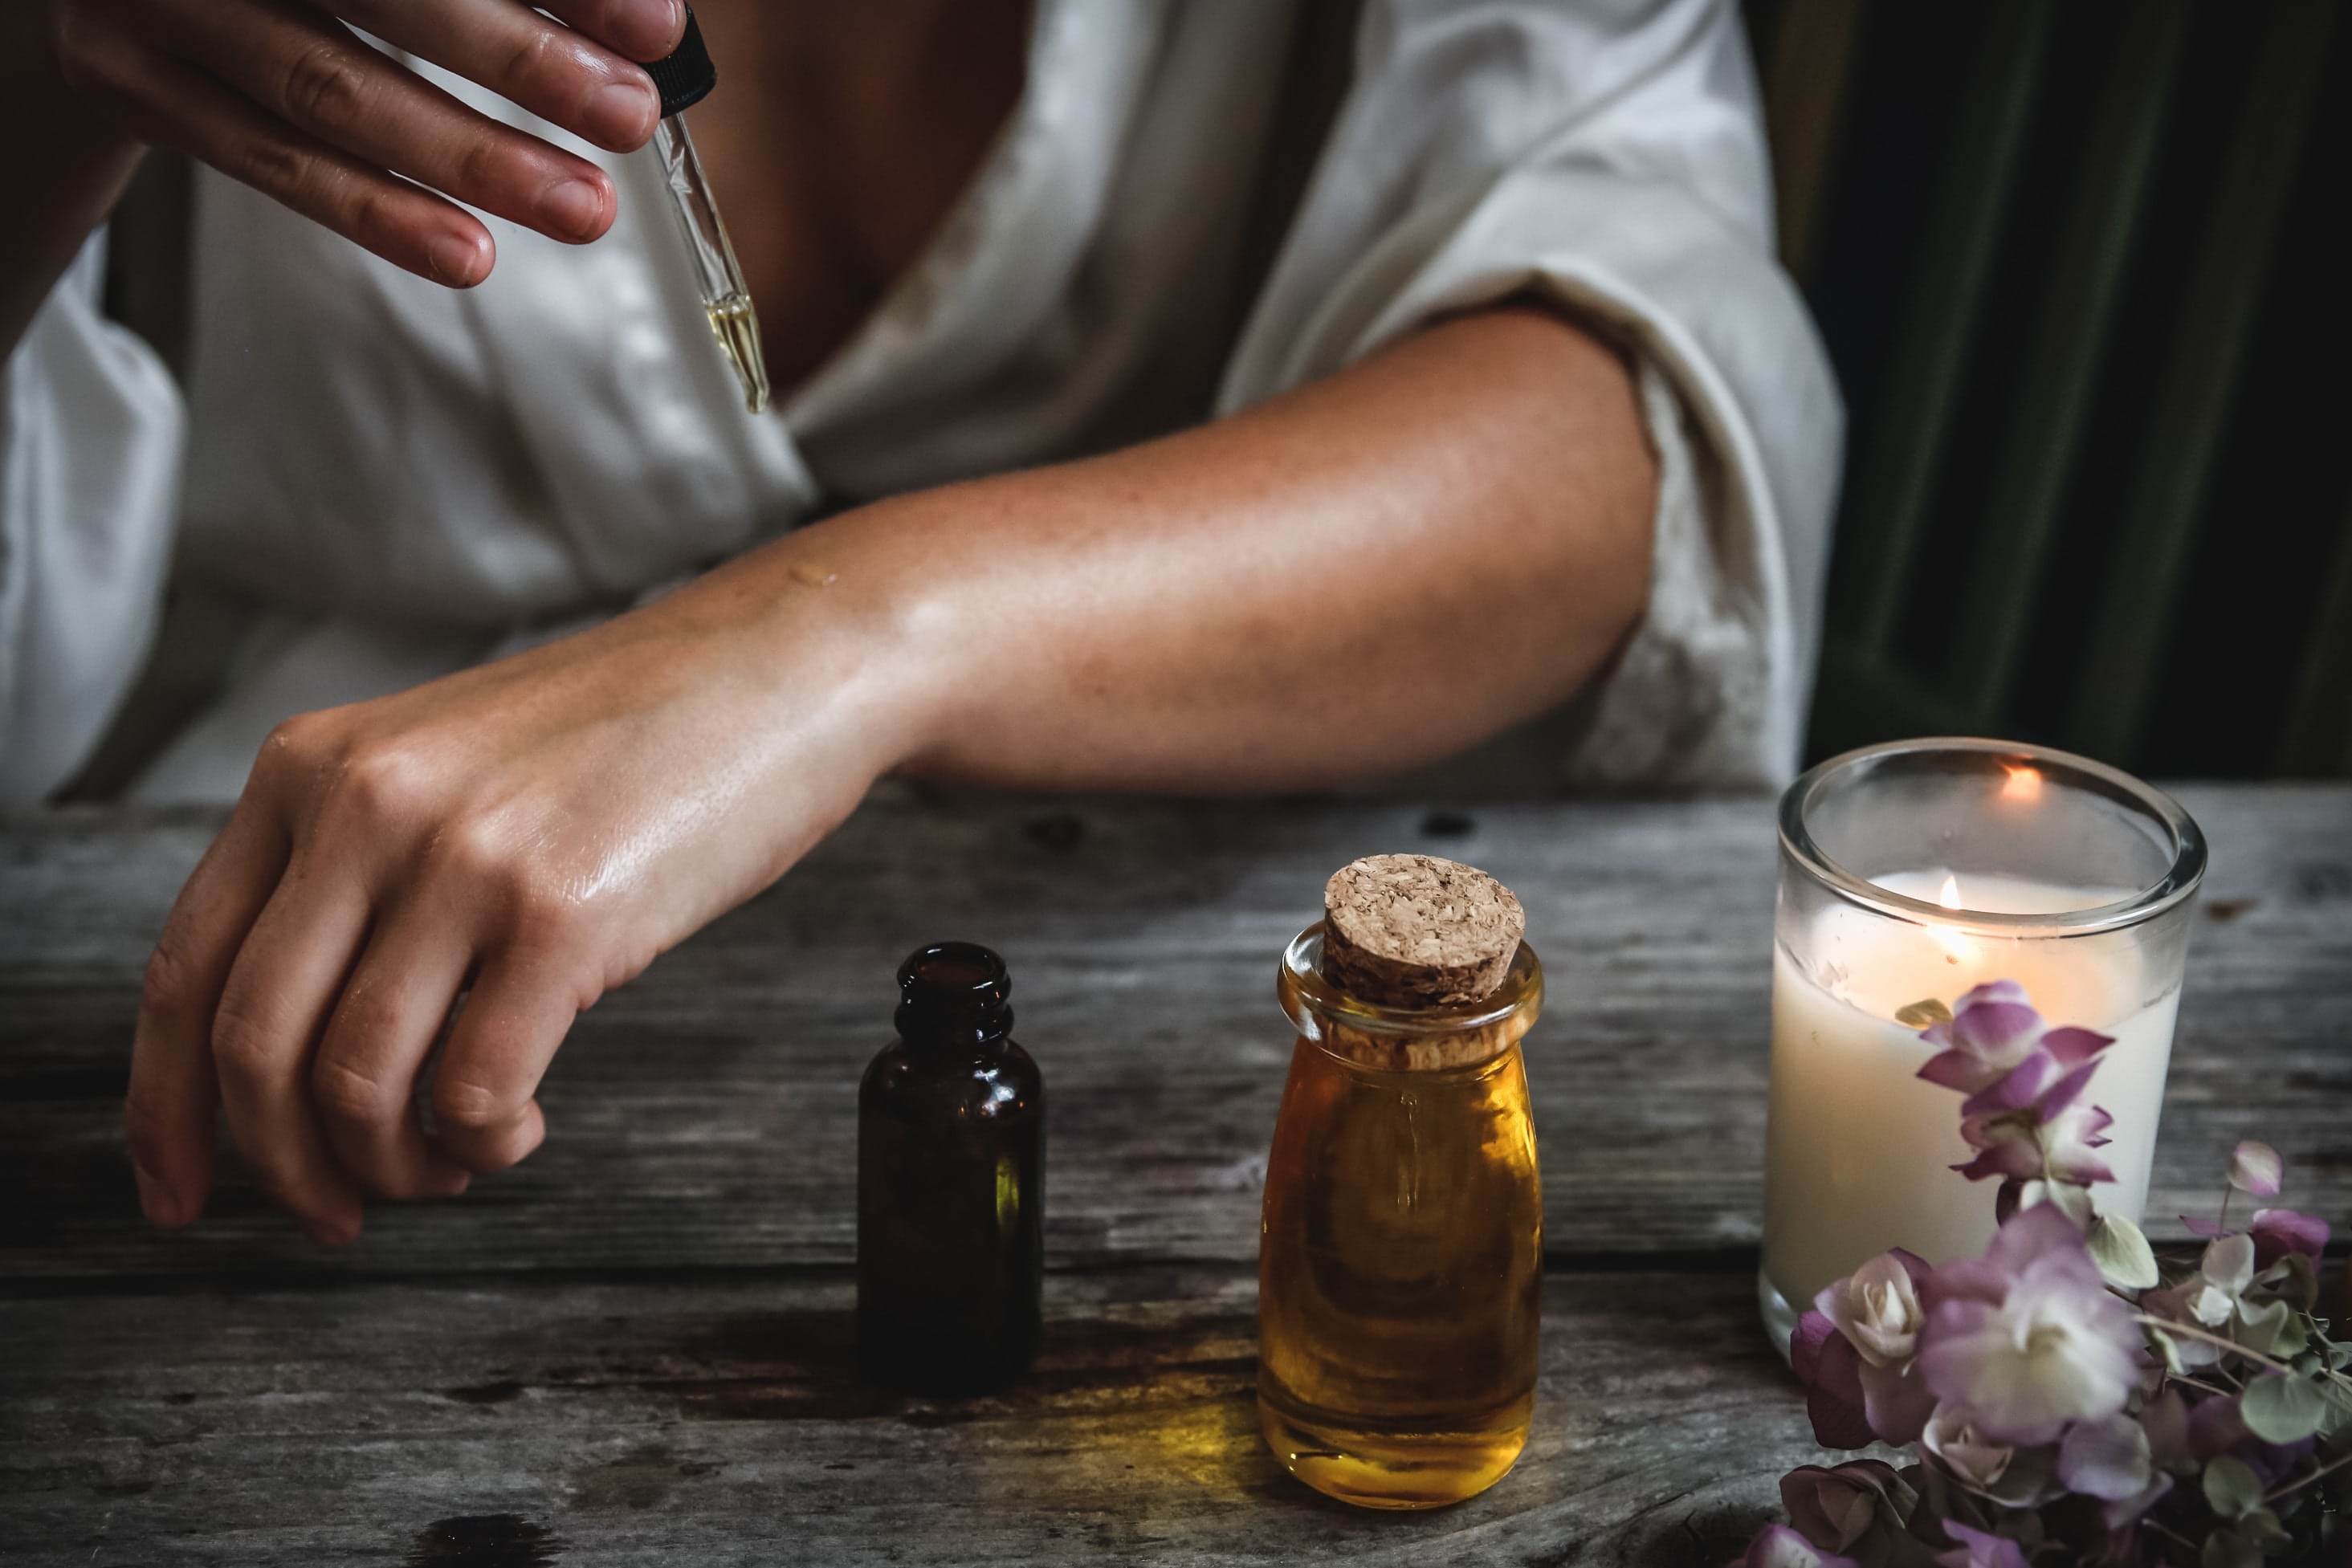 How to Use Essential Oils for Better Health - Essential Oils Worldwide